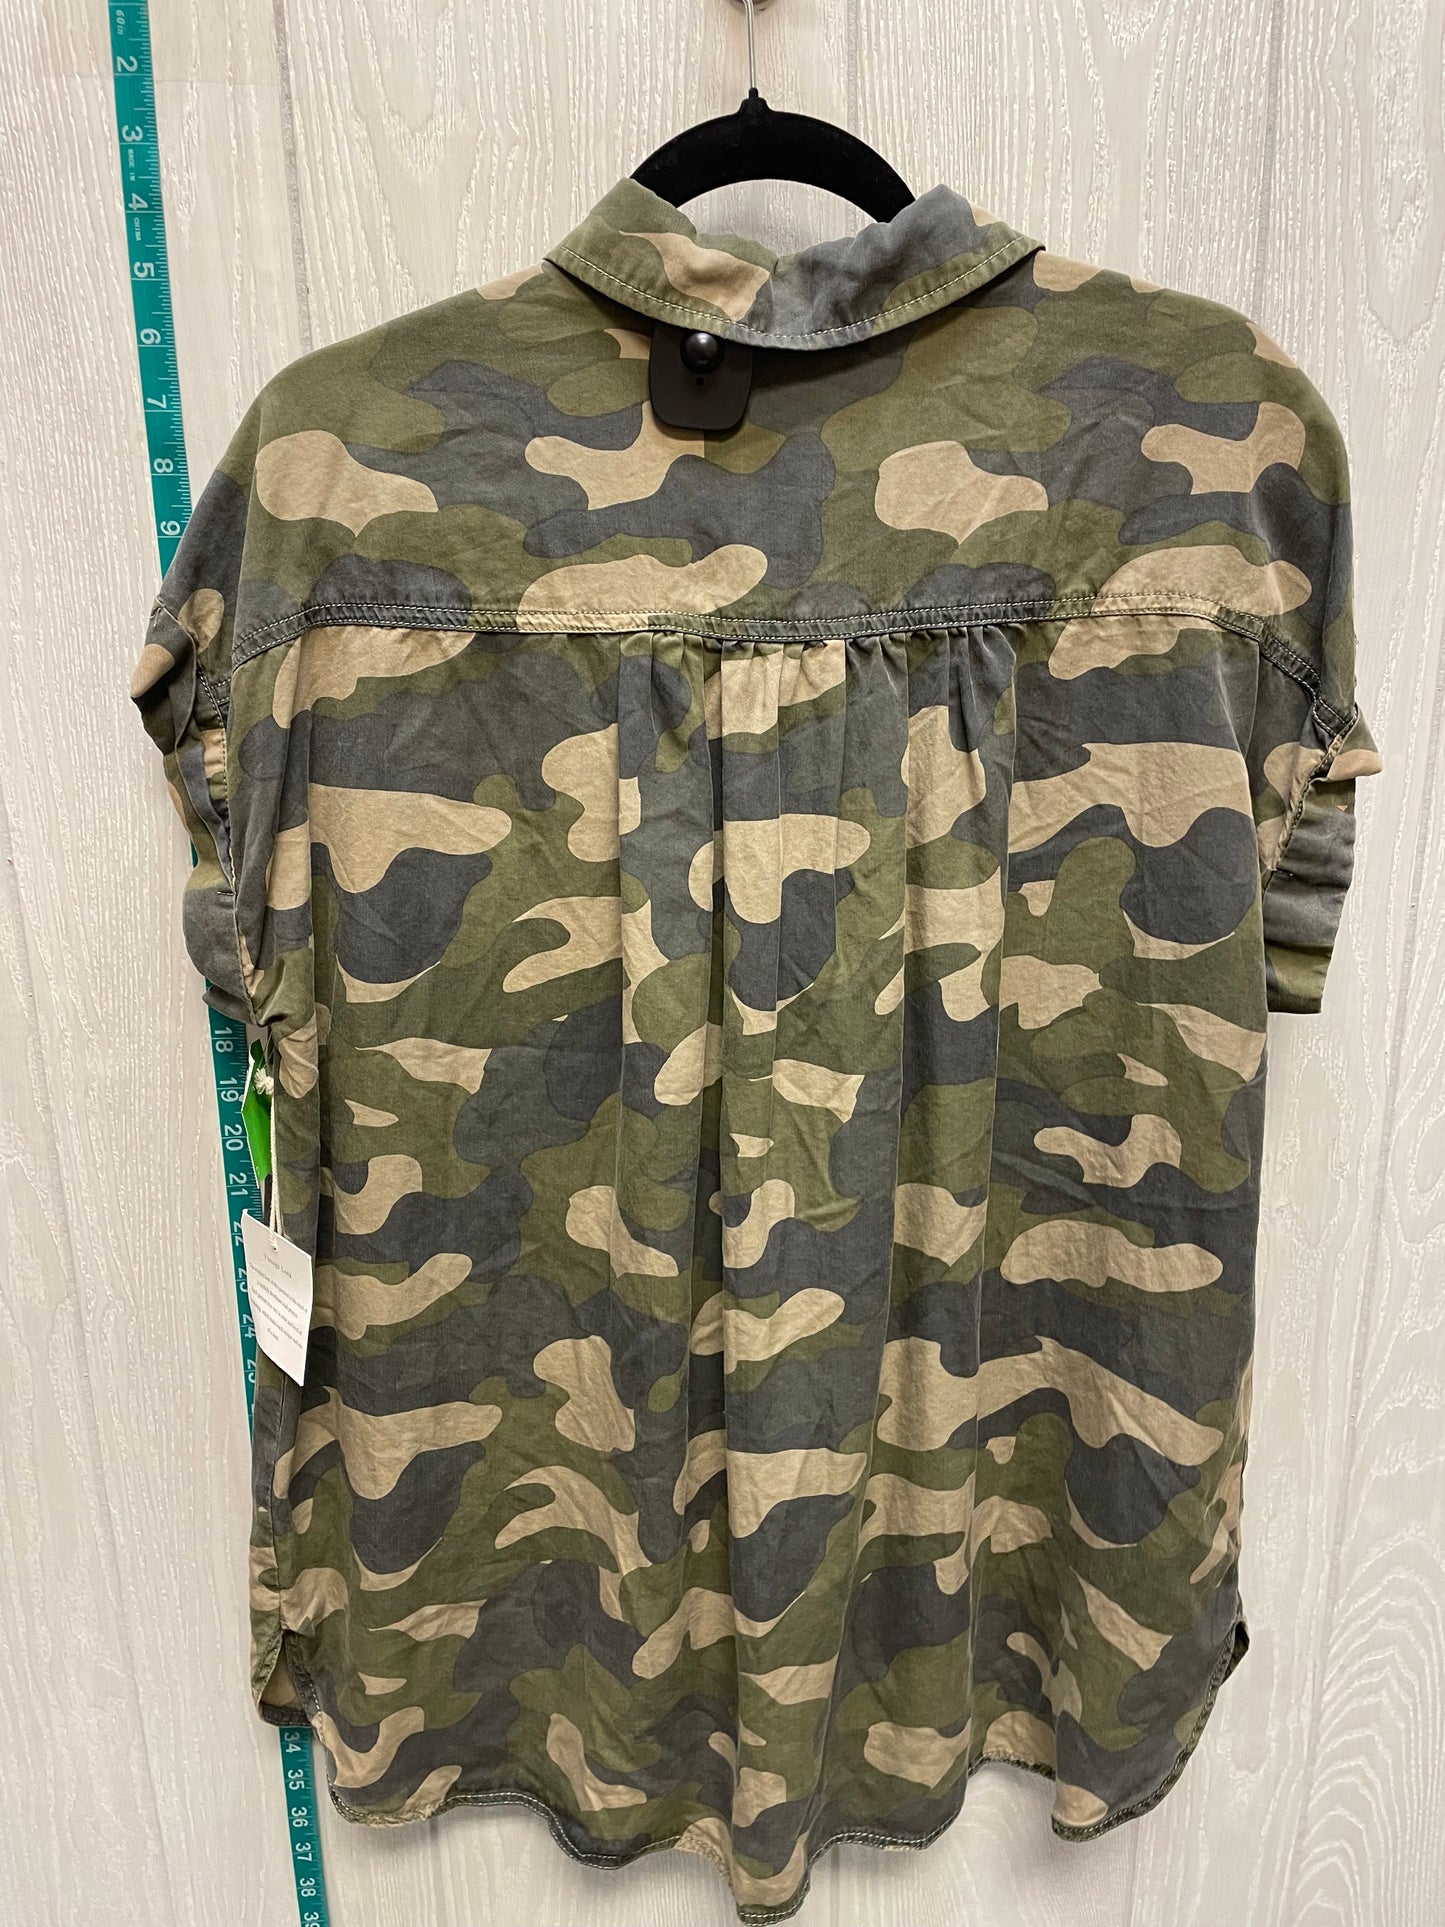 Camouflage Print Top Short Sleeve C And C, Size M